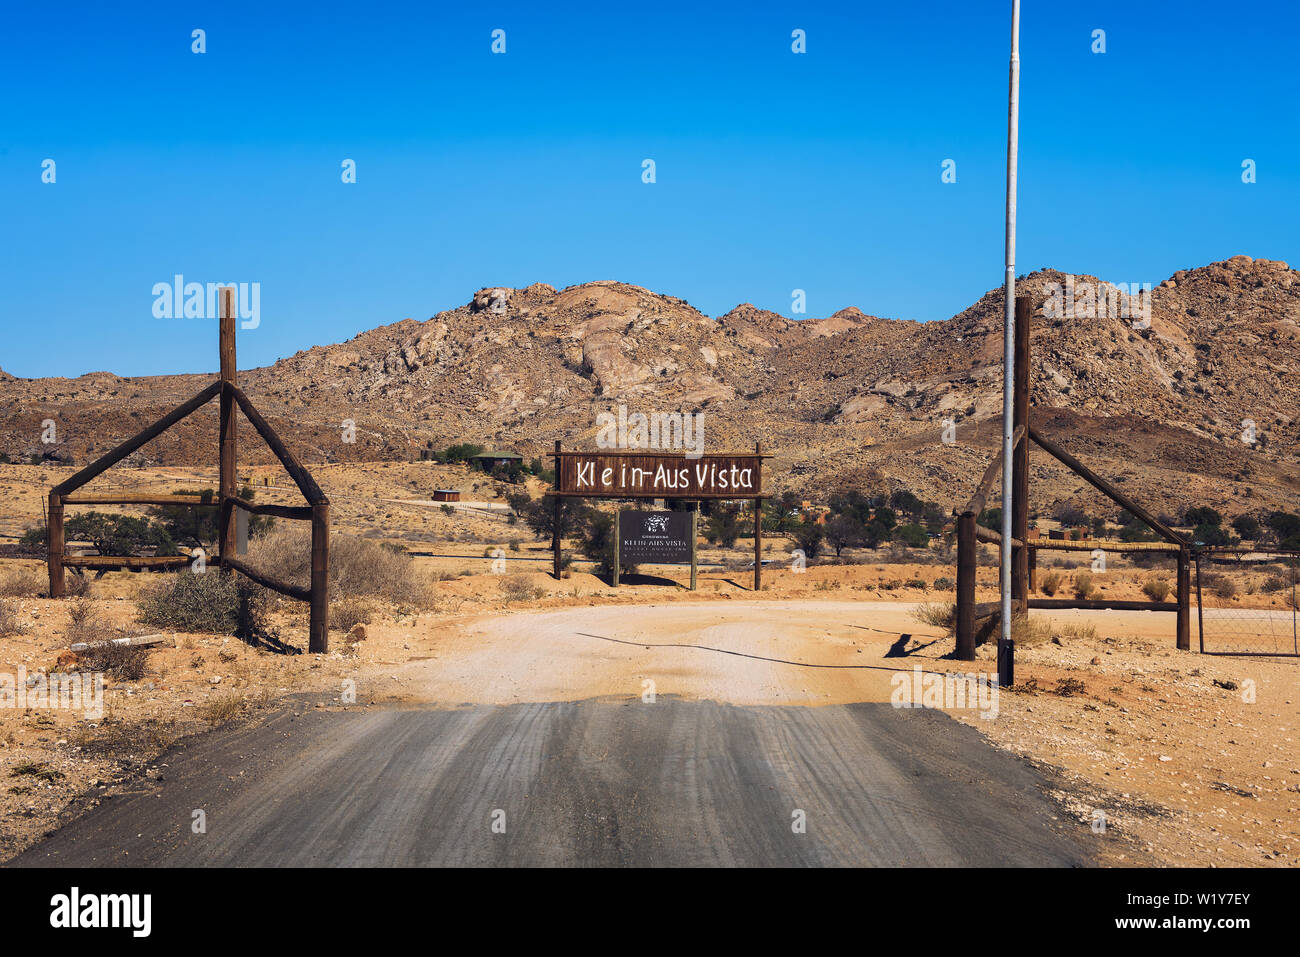 Entry gate to the Klein-Aus Vista lodge and restaurant in Namibia Stock Photo